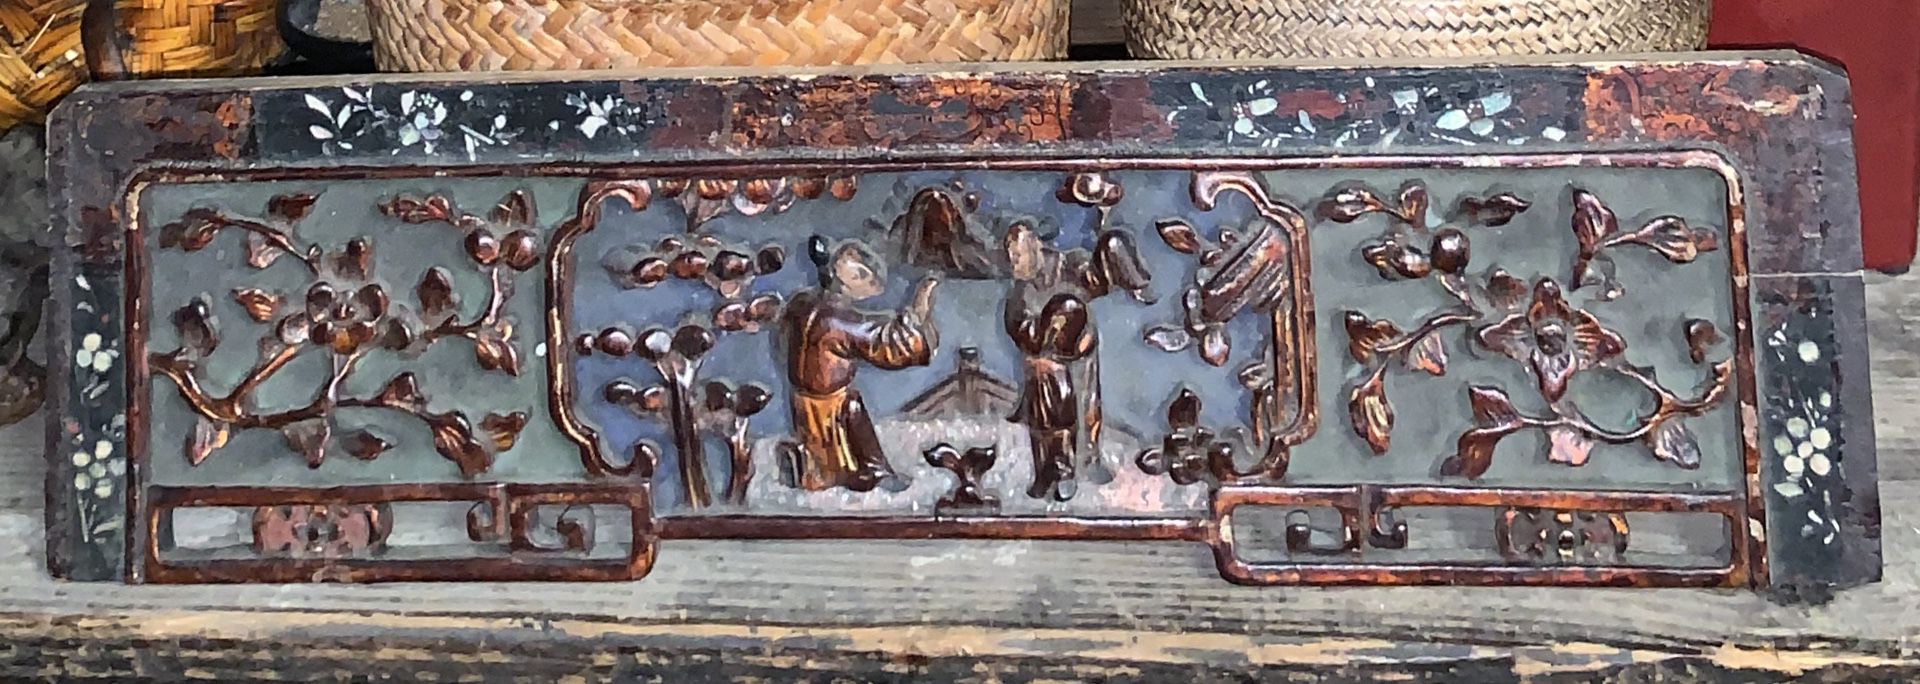 Antique Chinese Lacquer Wall Plaque